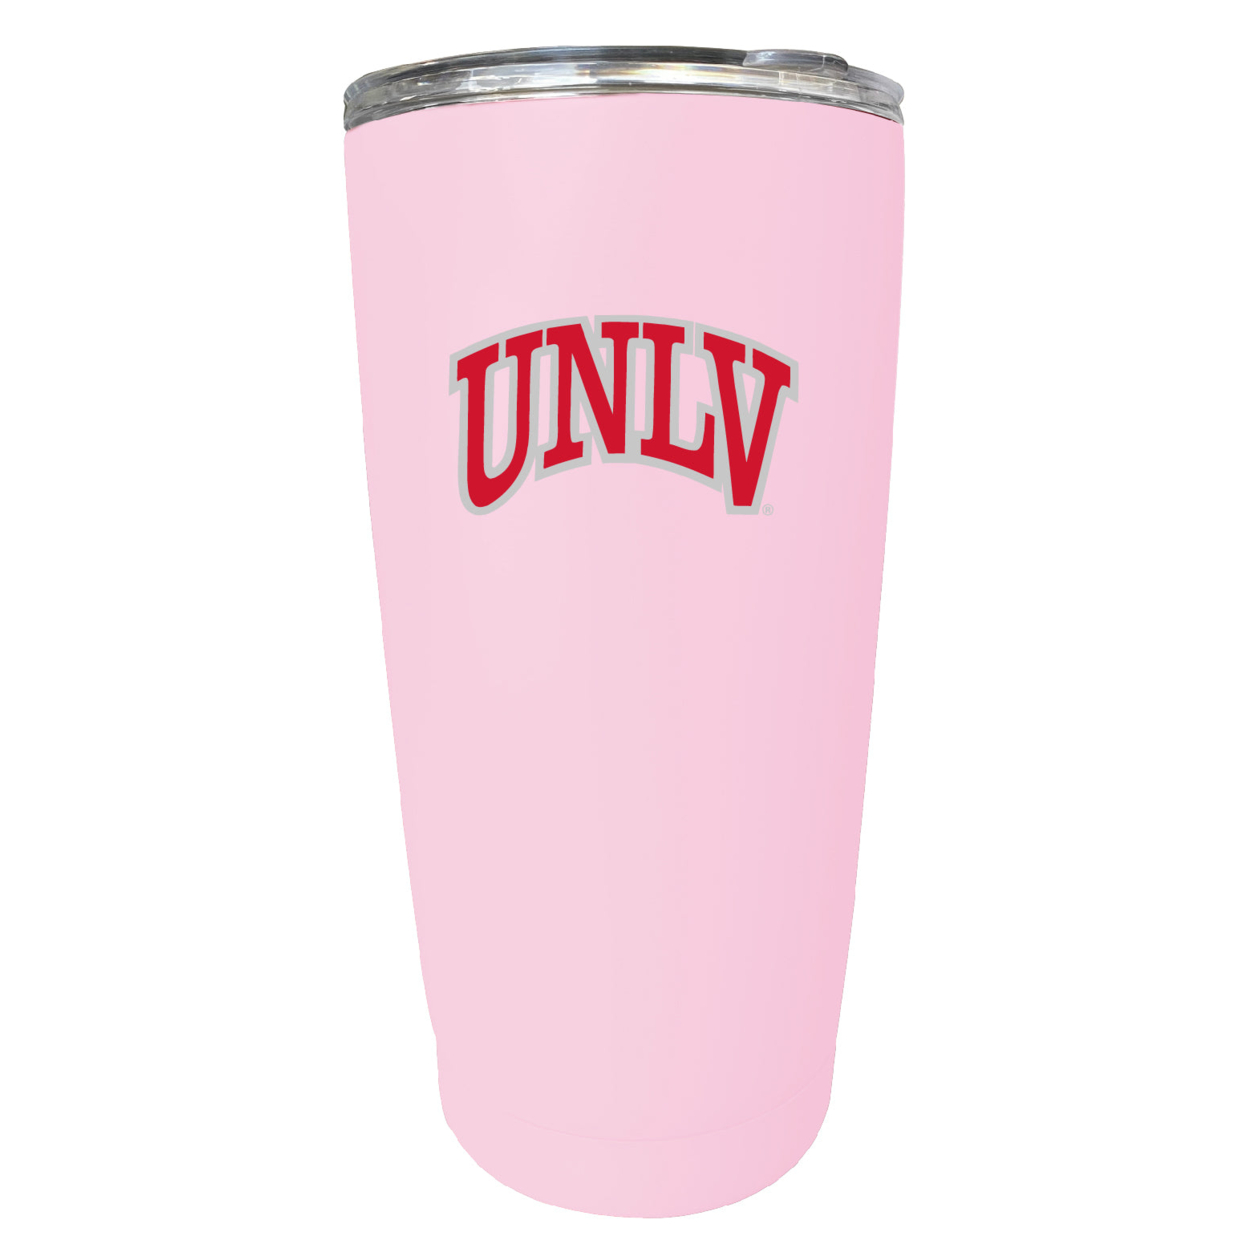 UNLV Rebels 16 Oz Stainless Steel Insulated Tumbler - Pink